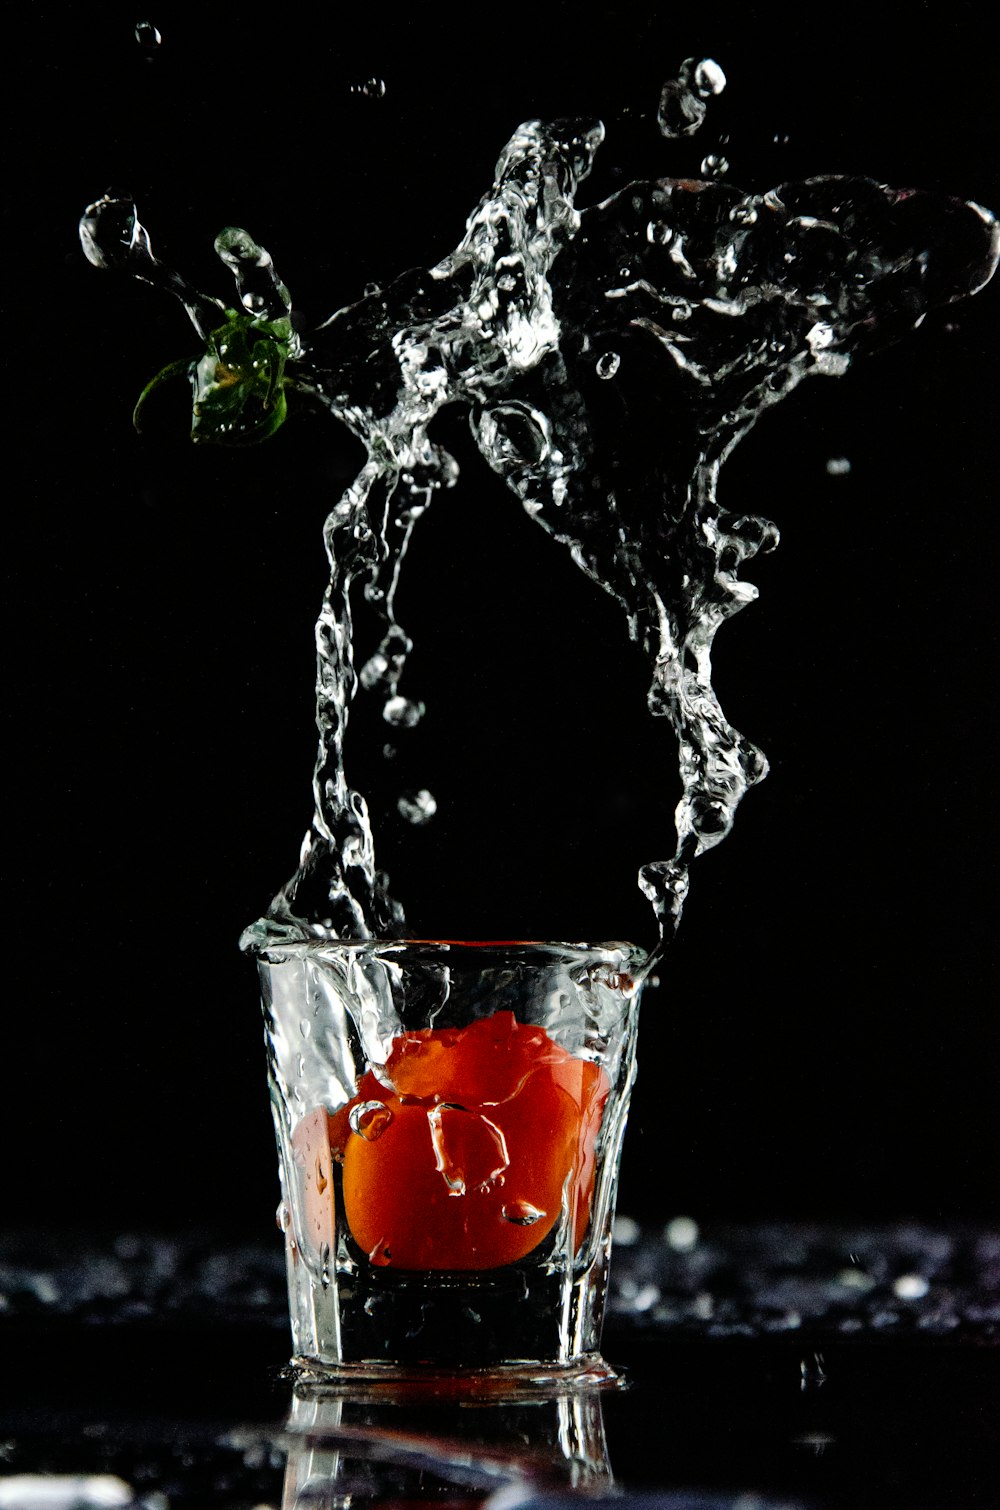 orange fruit dropped on shot glass with clear liquid spills